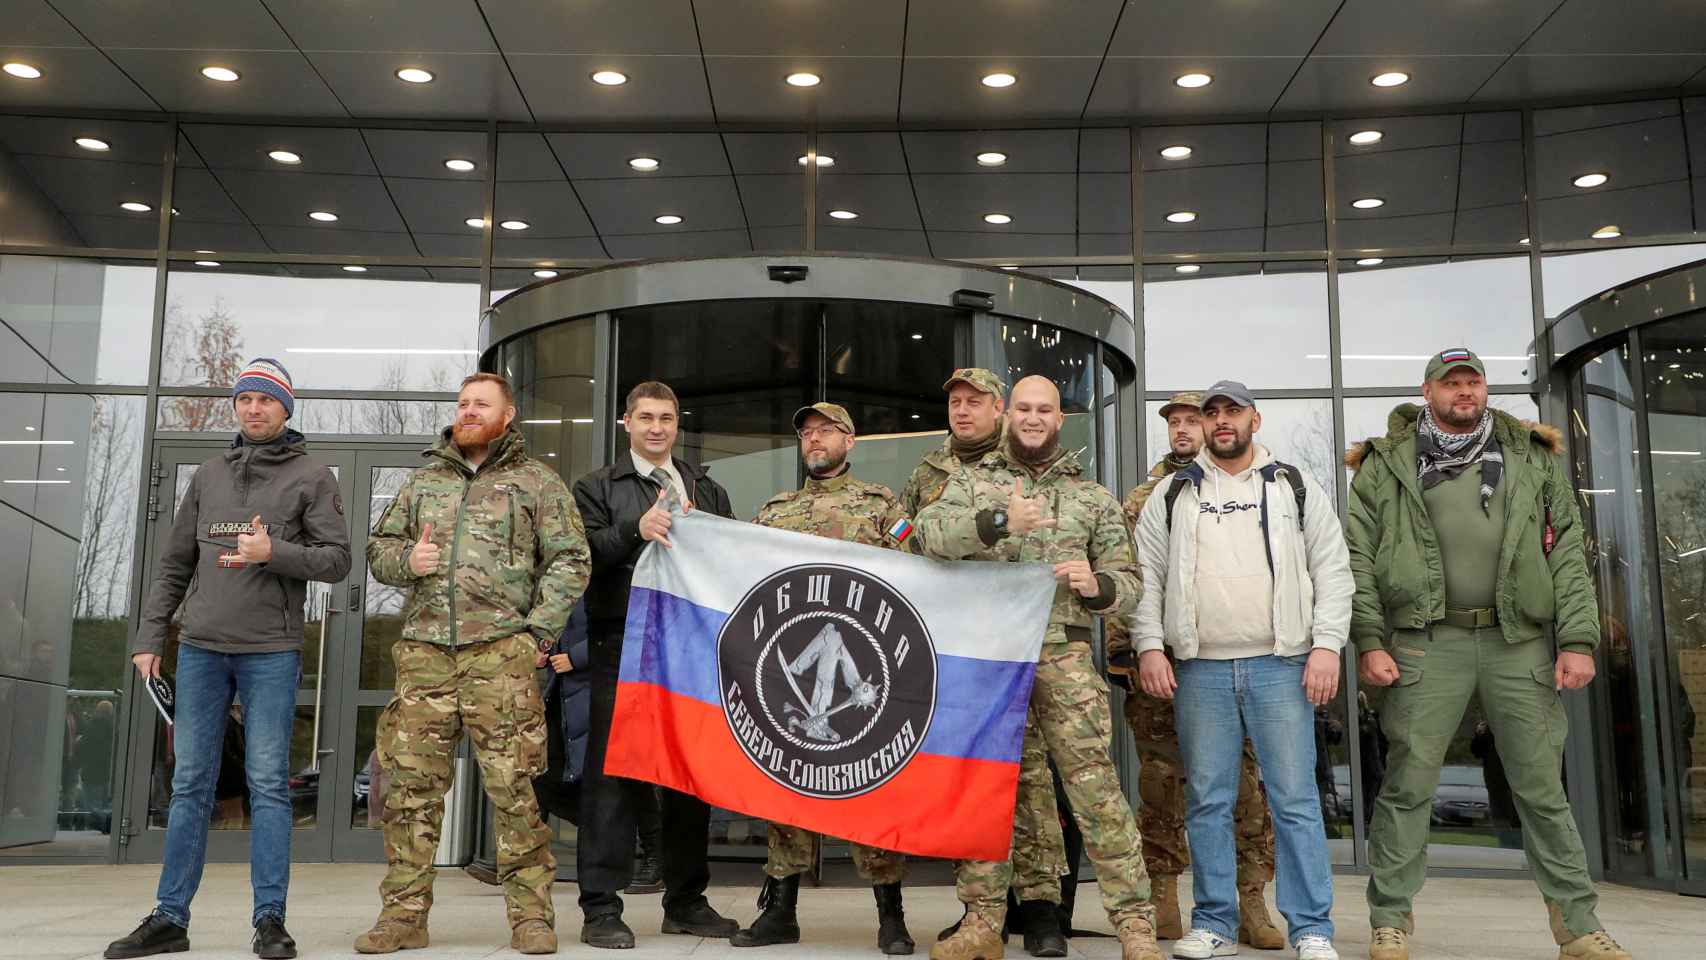 Members pose at the opening of the PMC Wagner Center in St. Petersburg last November.